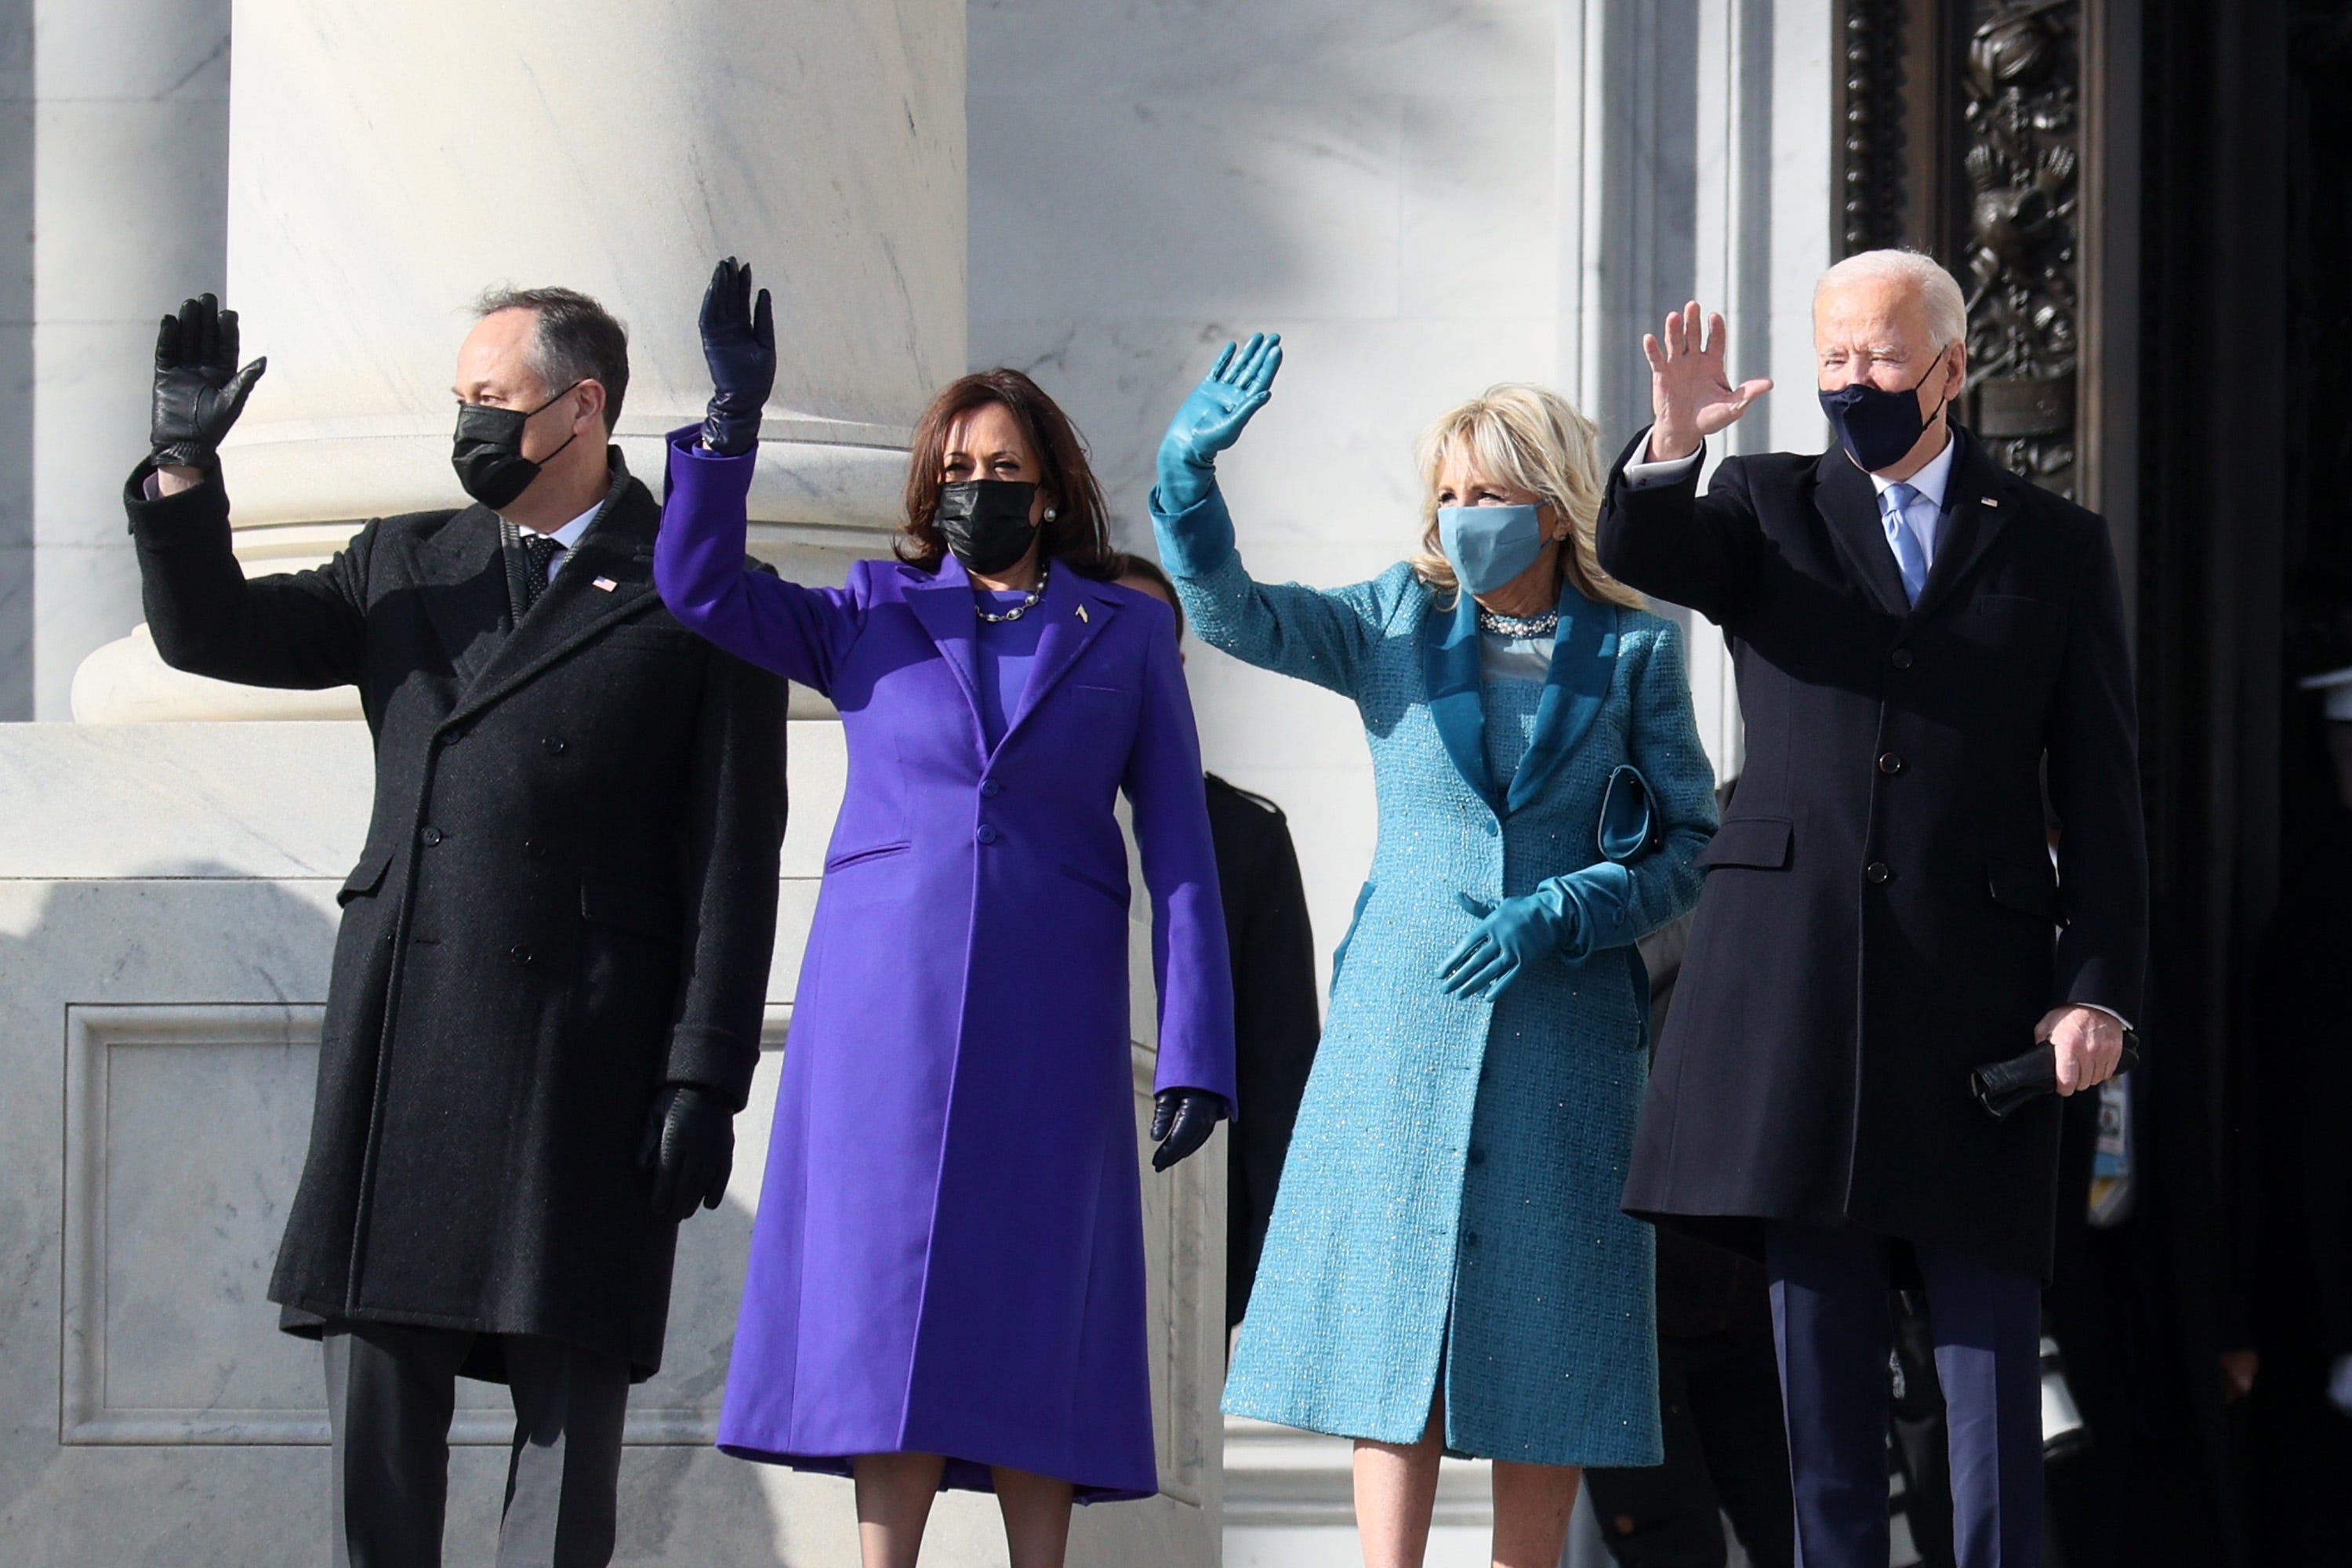 (L-R) Doug Emhoff, U.S. Vice President-elect Kamala Harris, Jill Biden and President-elect Joe Biden wave as they arrive on the East Front of the U.S. Capitol for  the inauguration on Jan. 20, 2021 in Washington, DC.